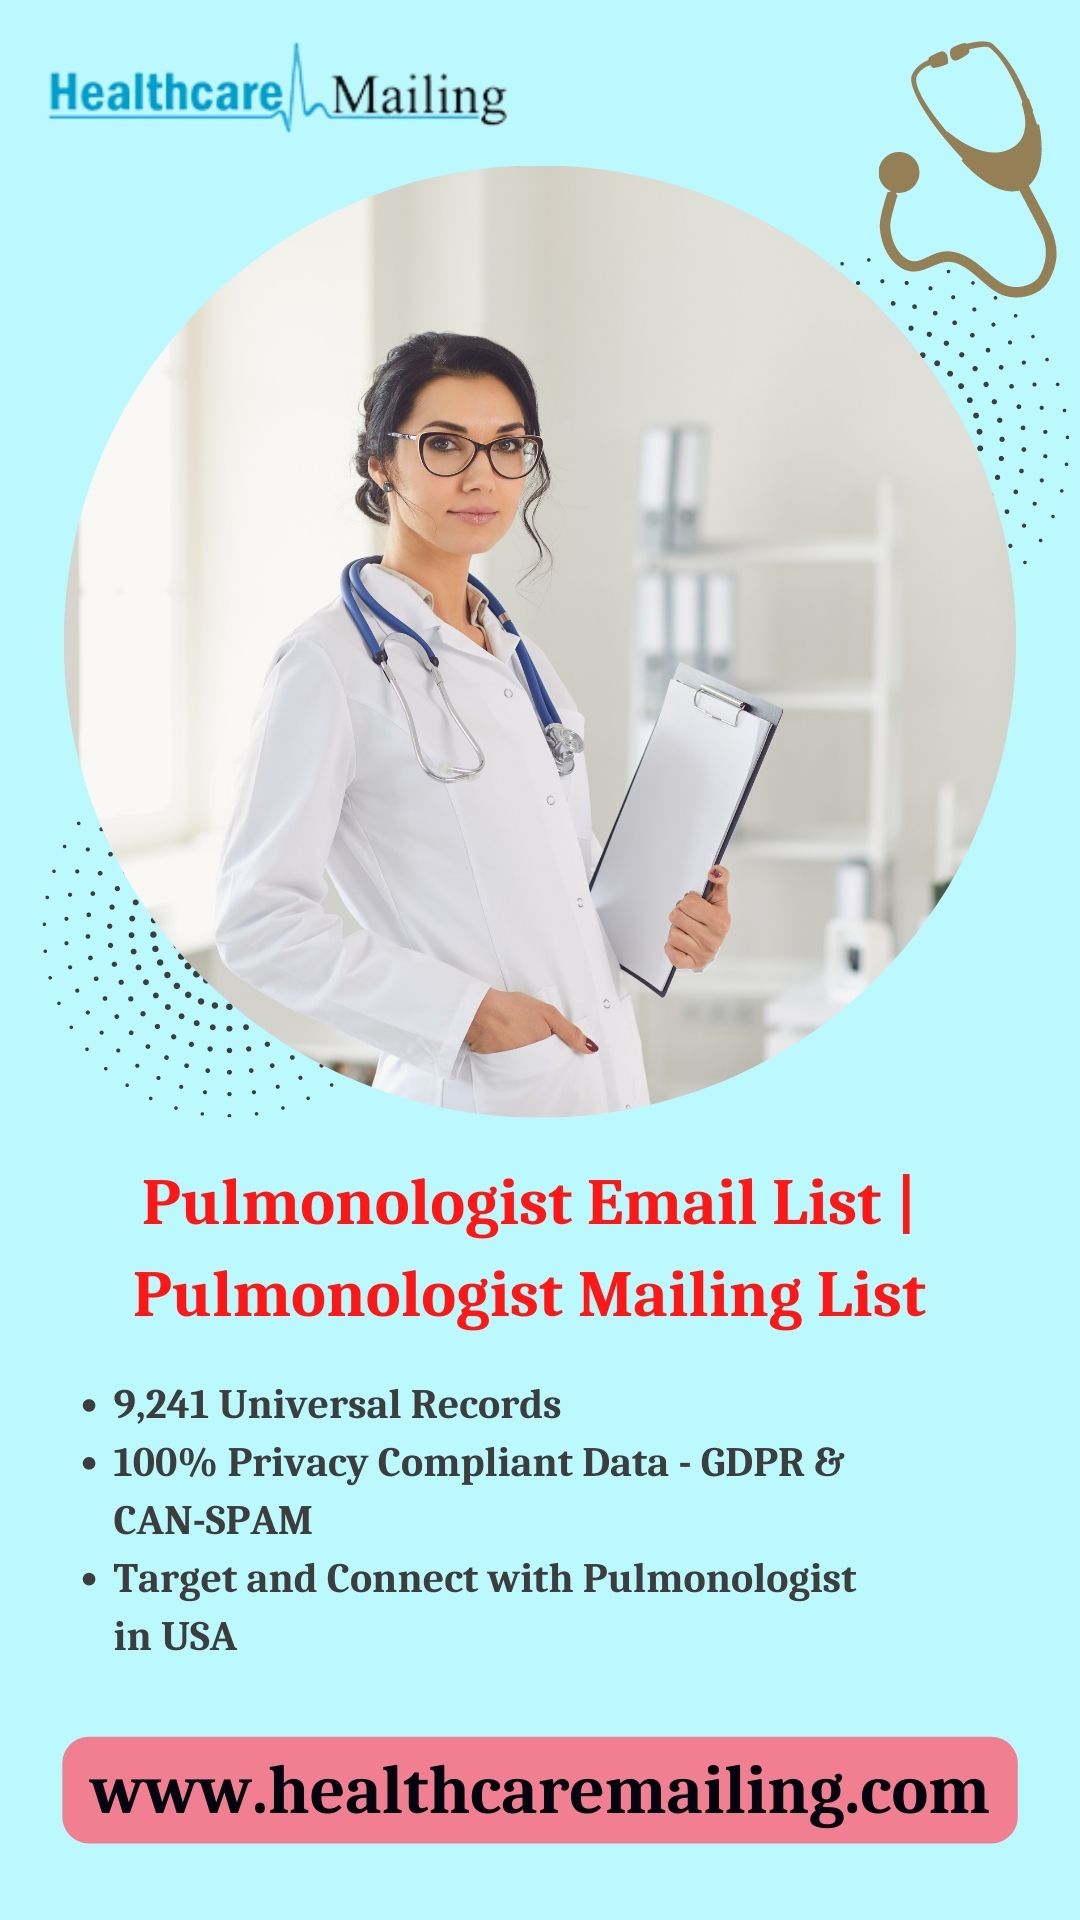 Pulmonologist Email List (2)-3271a478